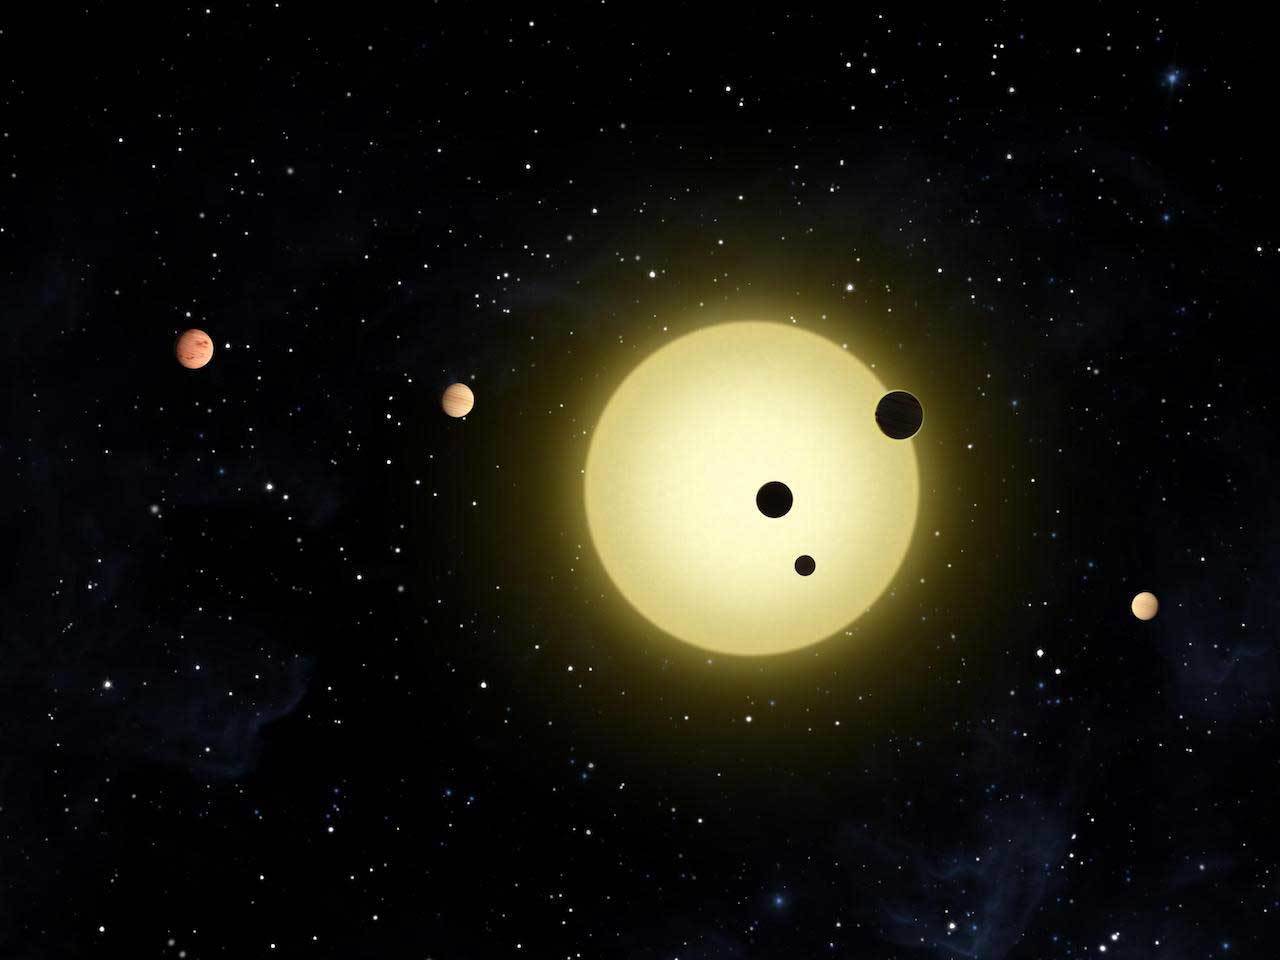 Artist's rendering of six planets orbiting a Sun-like star, Kepler-11. A newly discovered system, also likely with six planets, includes a "super-Earth" and four "mini-Neptunes." Image credit: NASA/Tim Pyle.